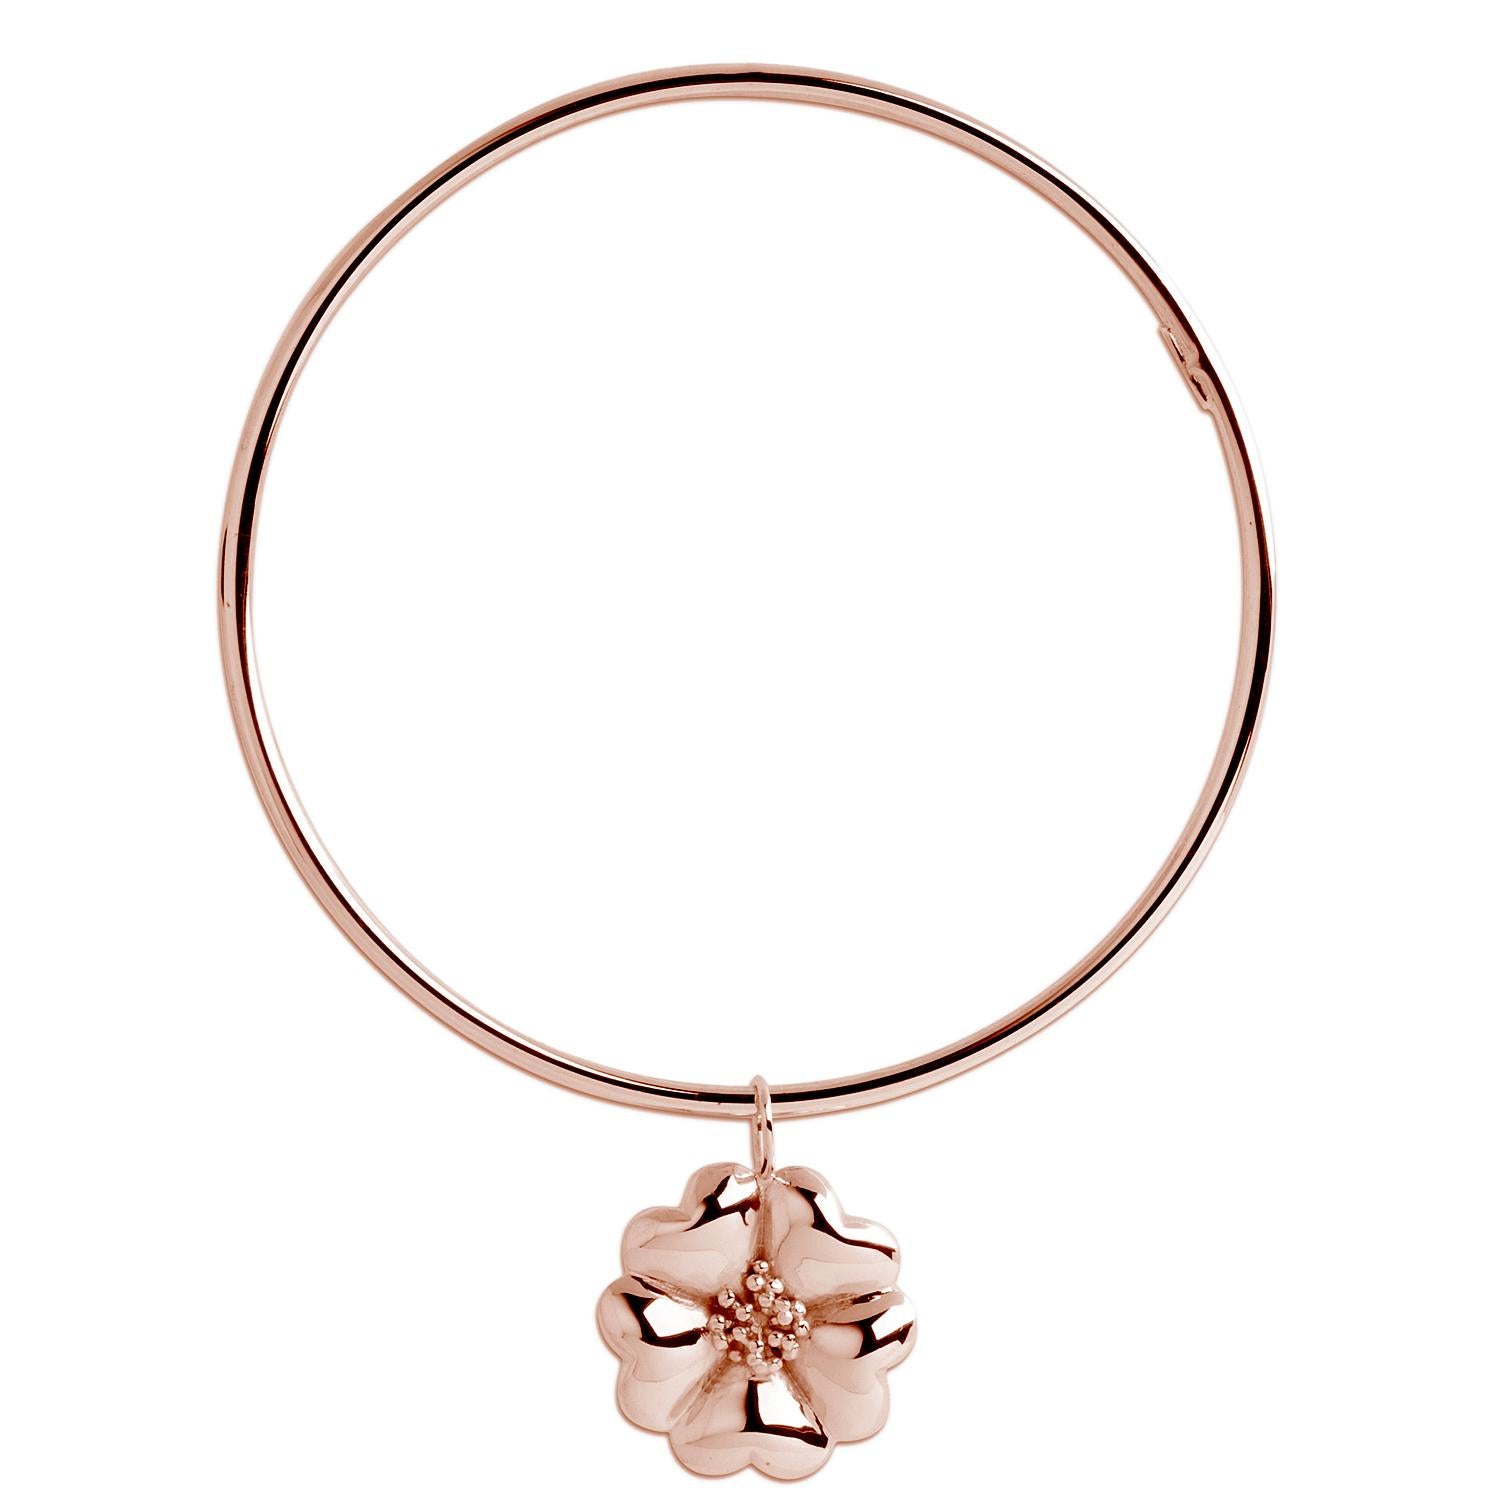 Designed in NYC

.925 Sterling Silver Blossom Dangle Bangle Bracelet. No matter the season, allow natural beauty to surround you wherever you go. .925 sterling silver blossom dangle bangle bracelet: 

Sterling silver bangle and blossom 
High-polish